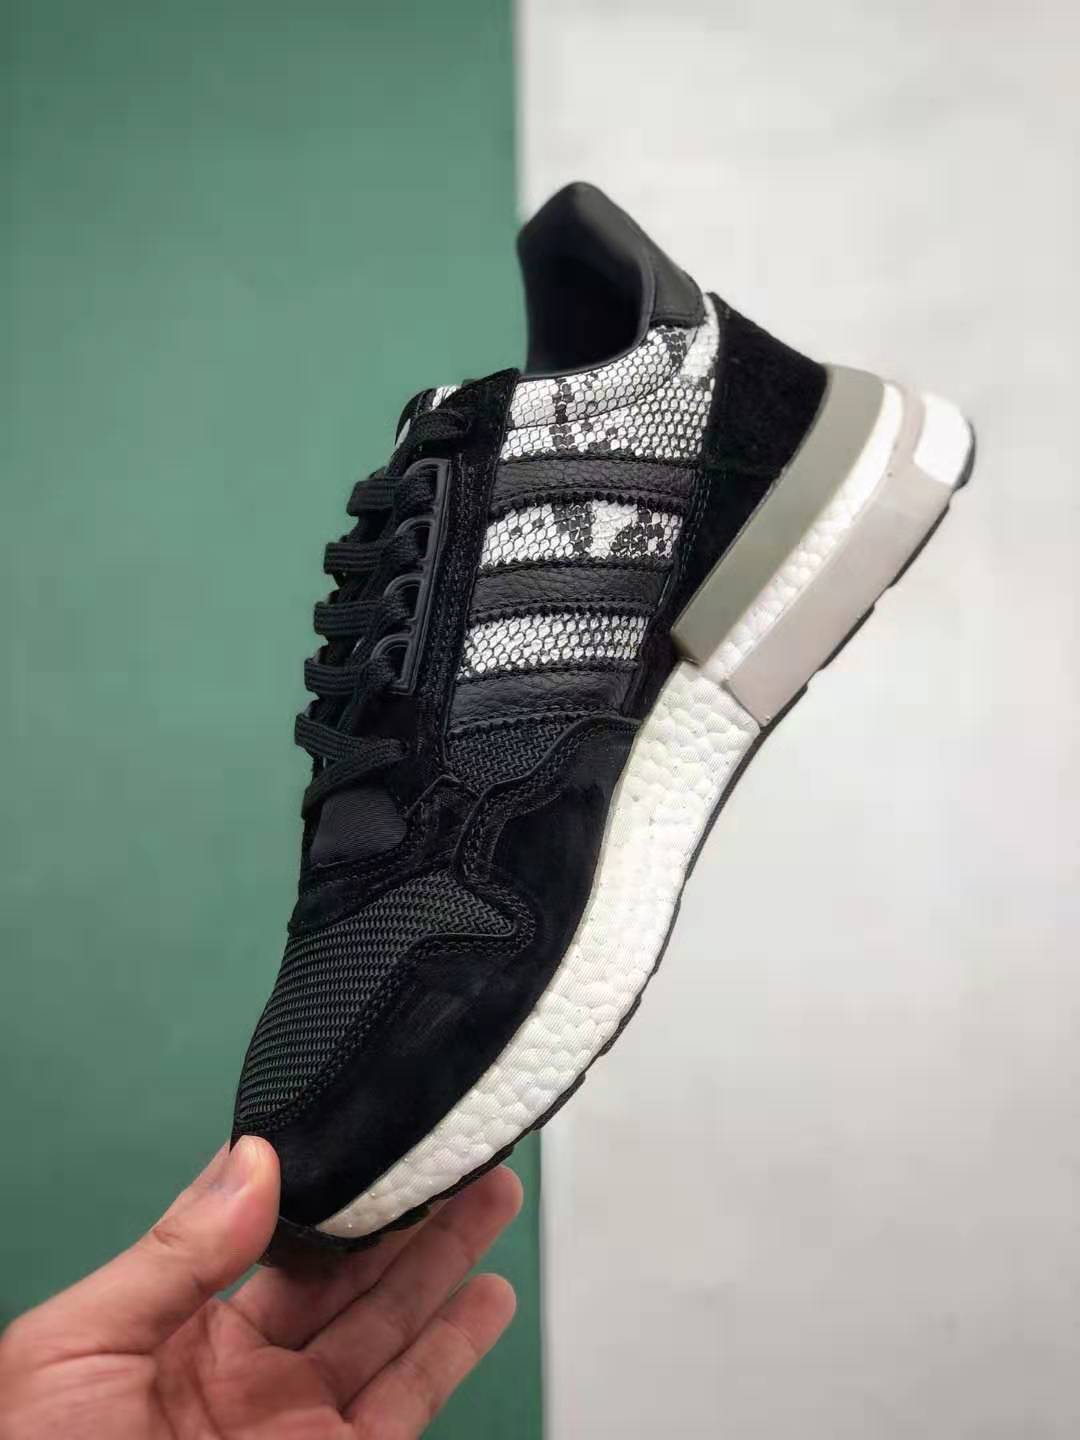 Adidas ZX 500 RM 'Snakeskin' BD7924 - Premium Style and Comfort